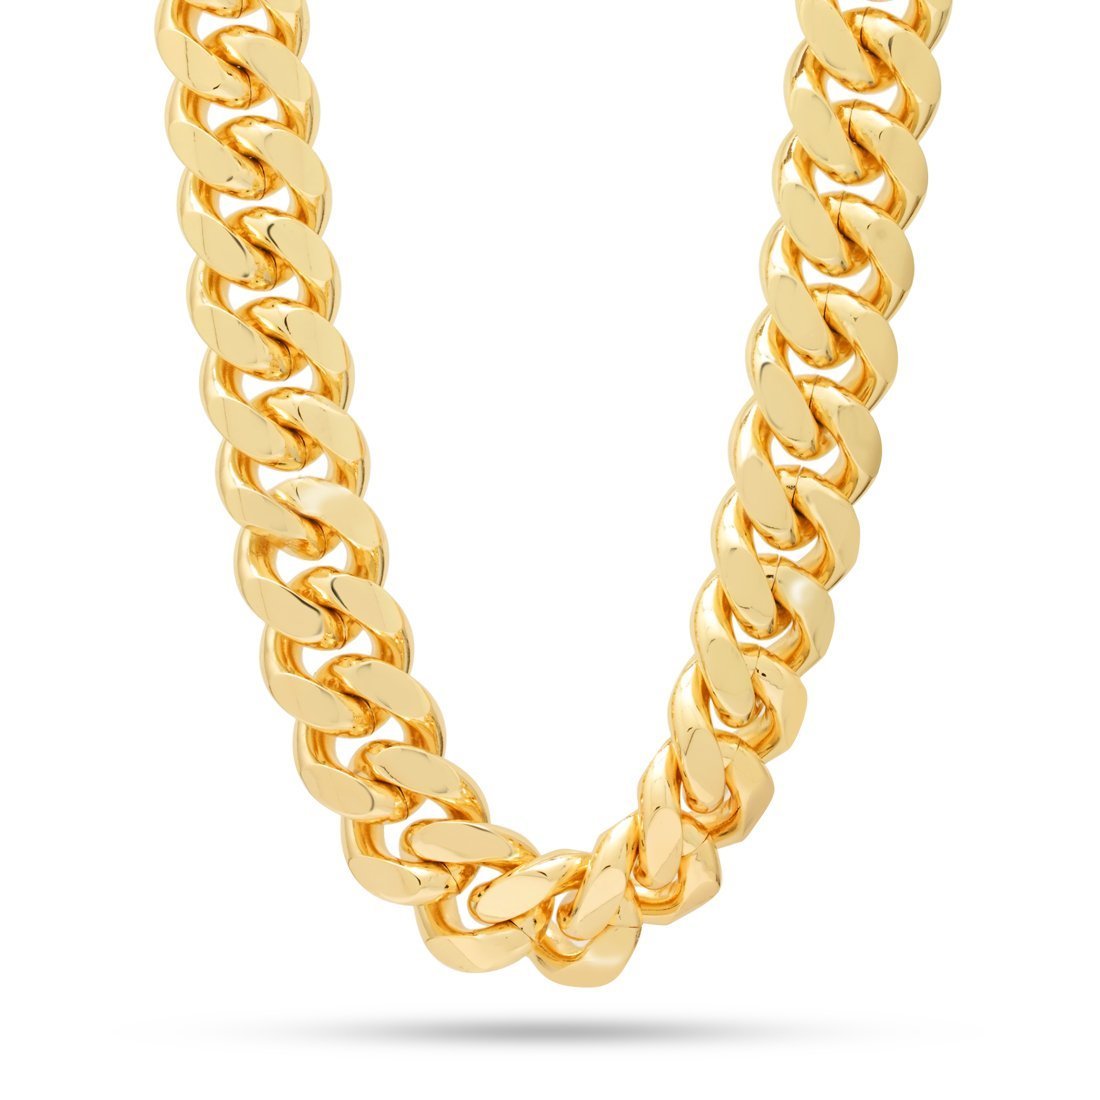 12mm Cuban Link Chain, Thick Cuban Stainless Steel Gold Chain 18to 24 Cuban Link Chain, Gold Miami Cuban Link Chain, Hefty Link Chain